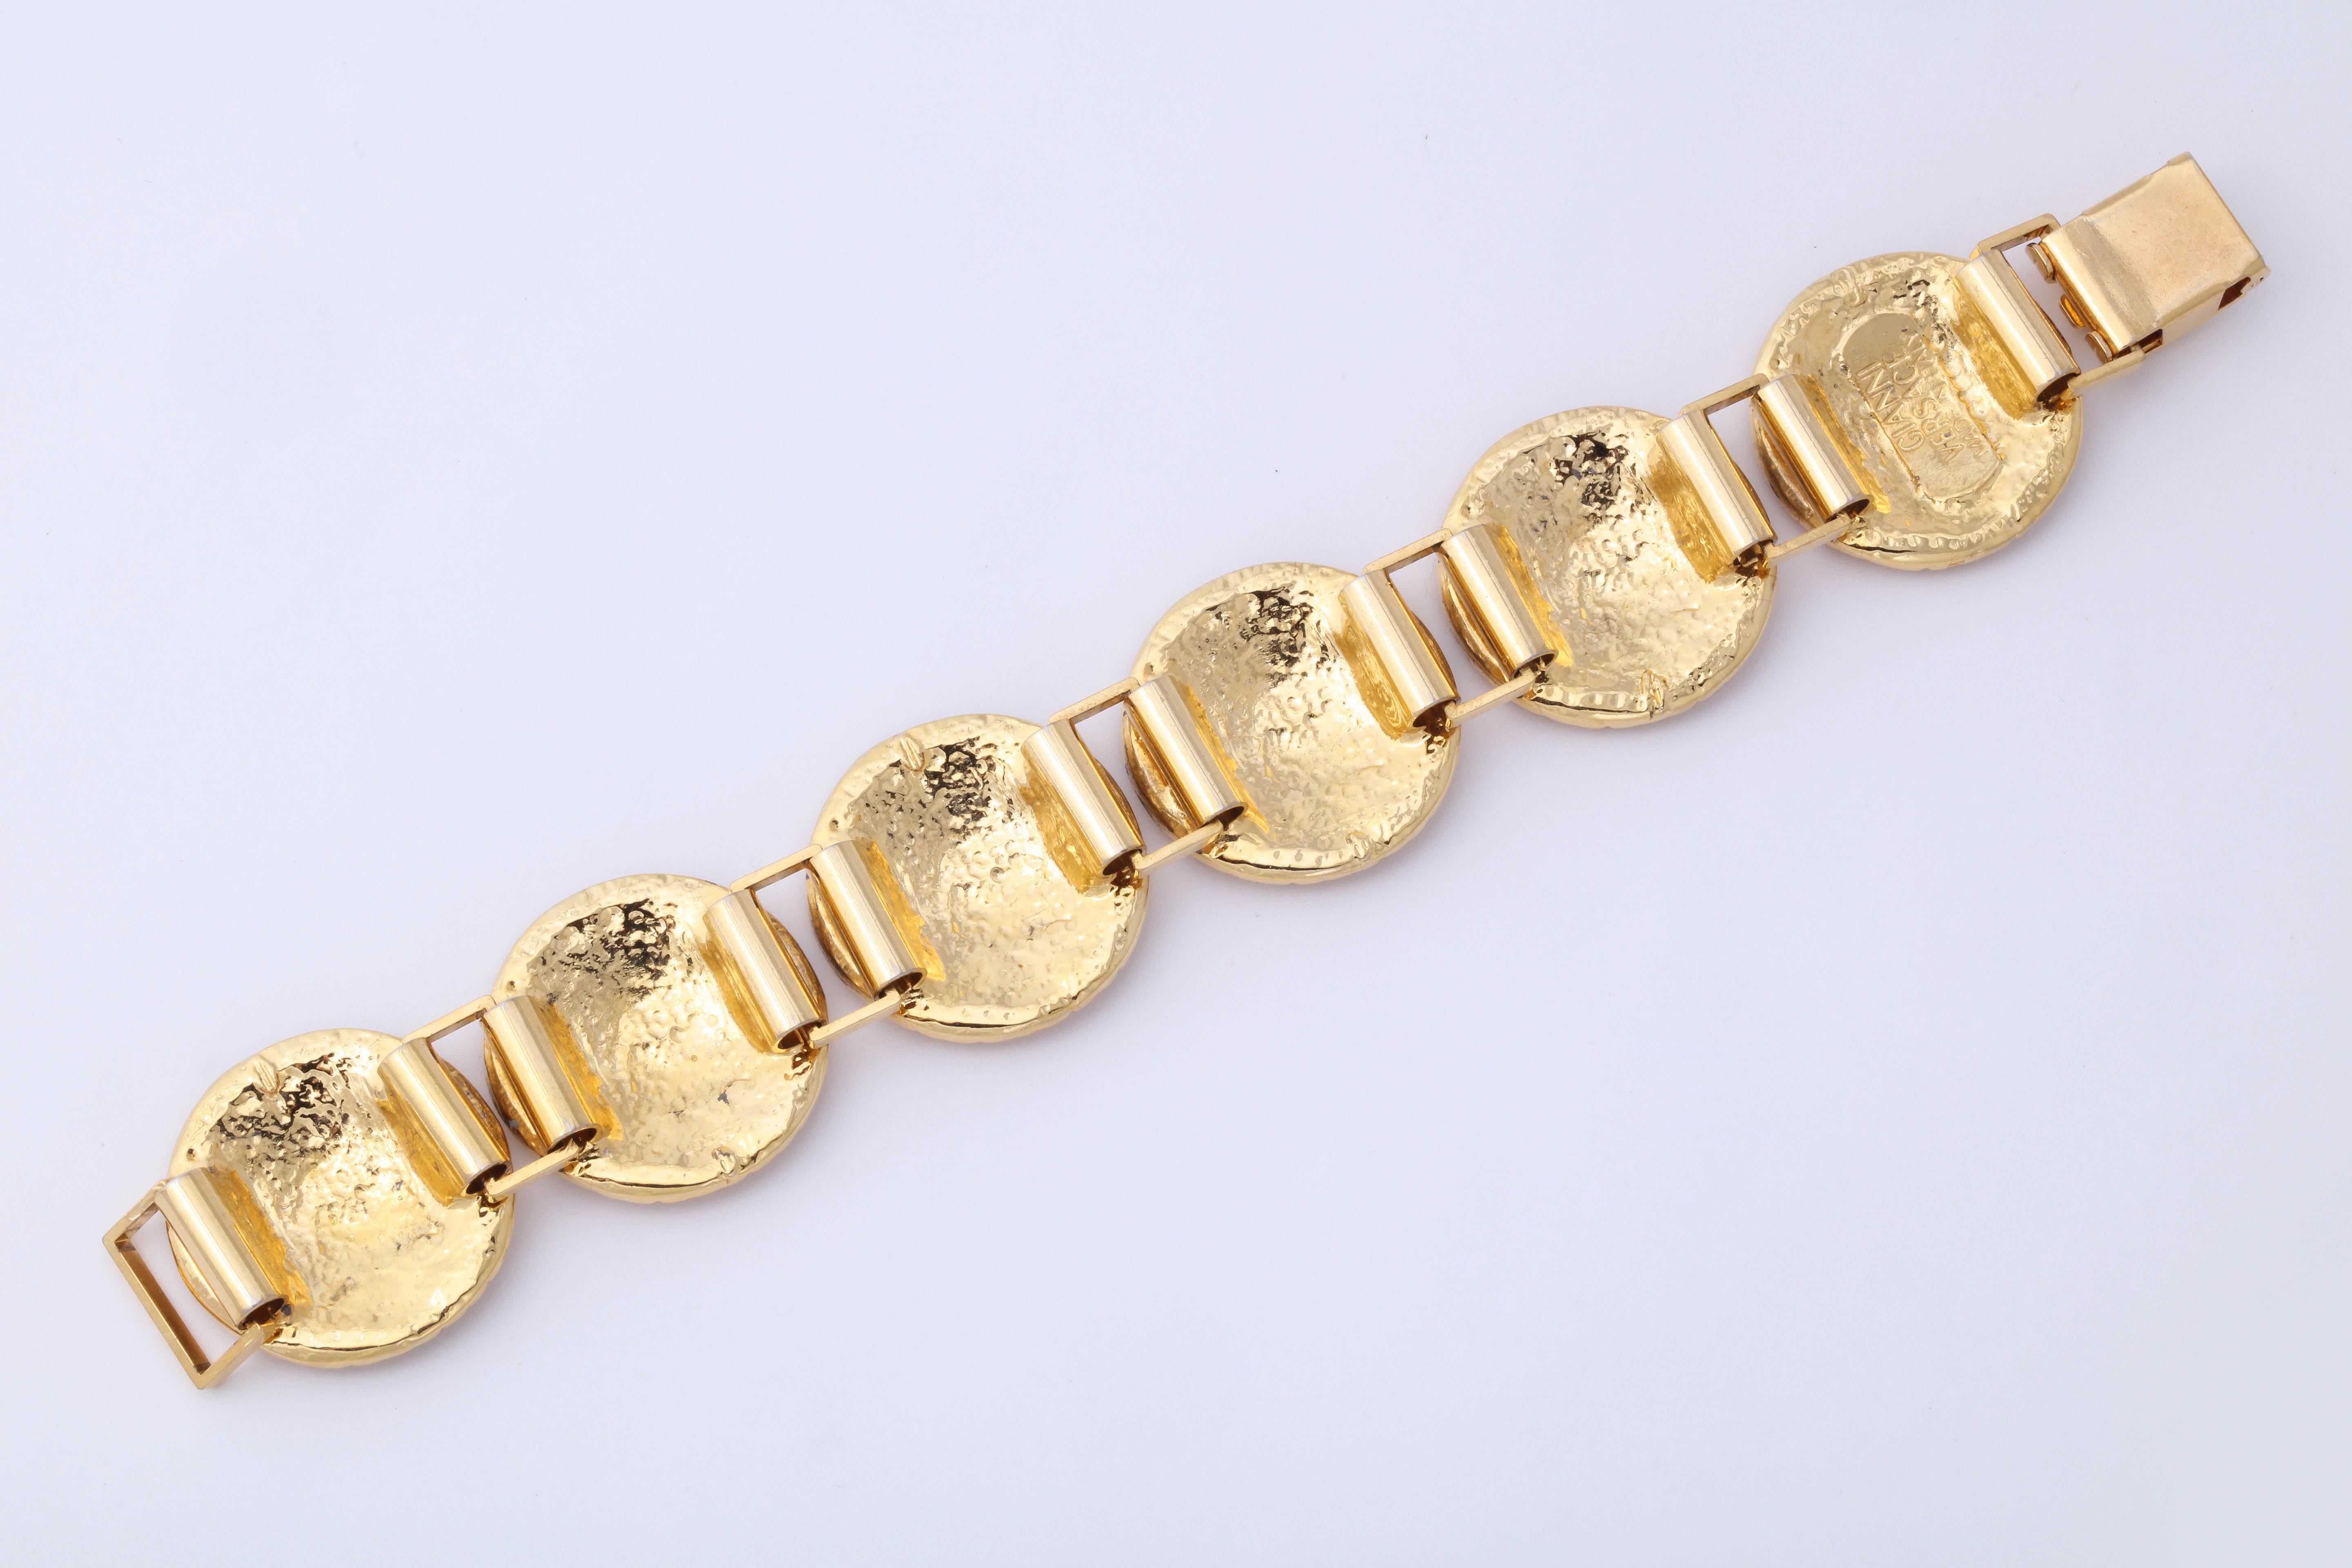 Gianni Versace Gold Toned Bracelet With 6 Medusas and Rhinestones For Sale 1